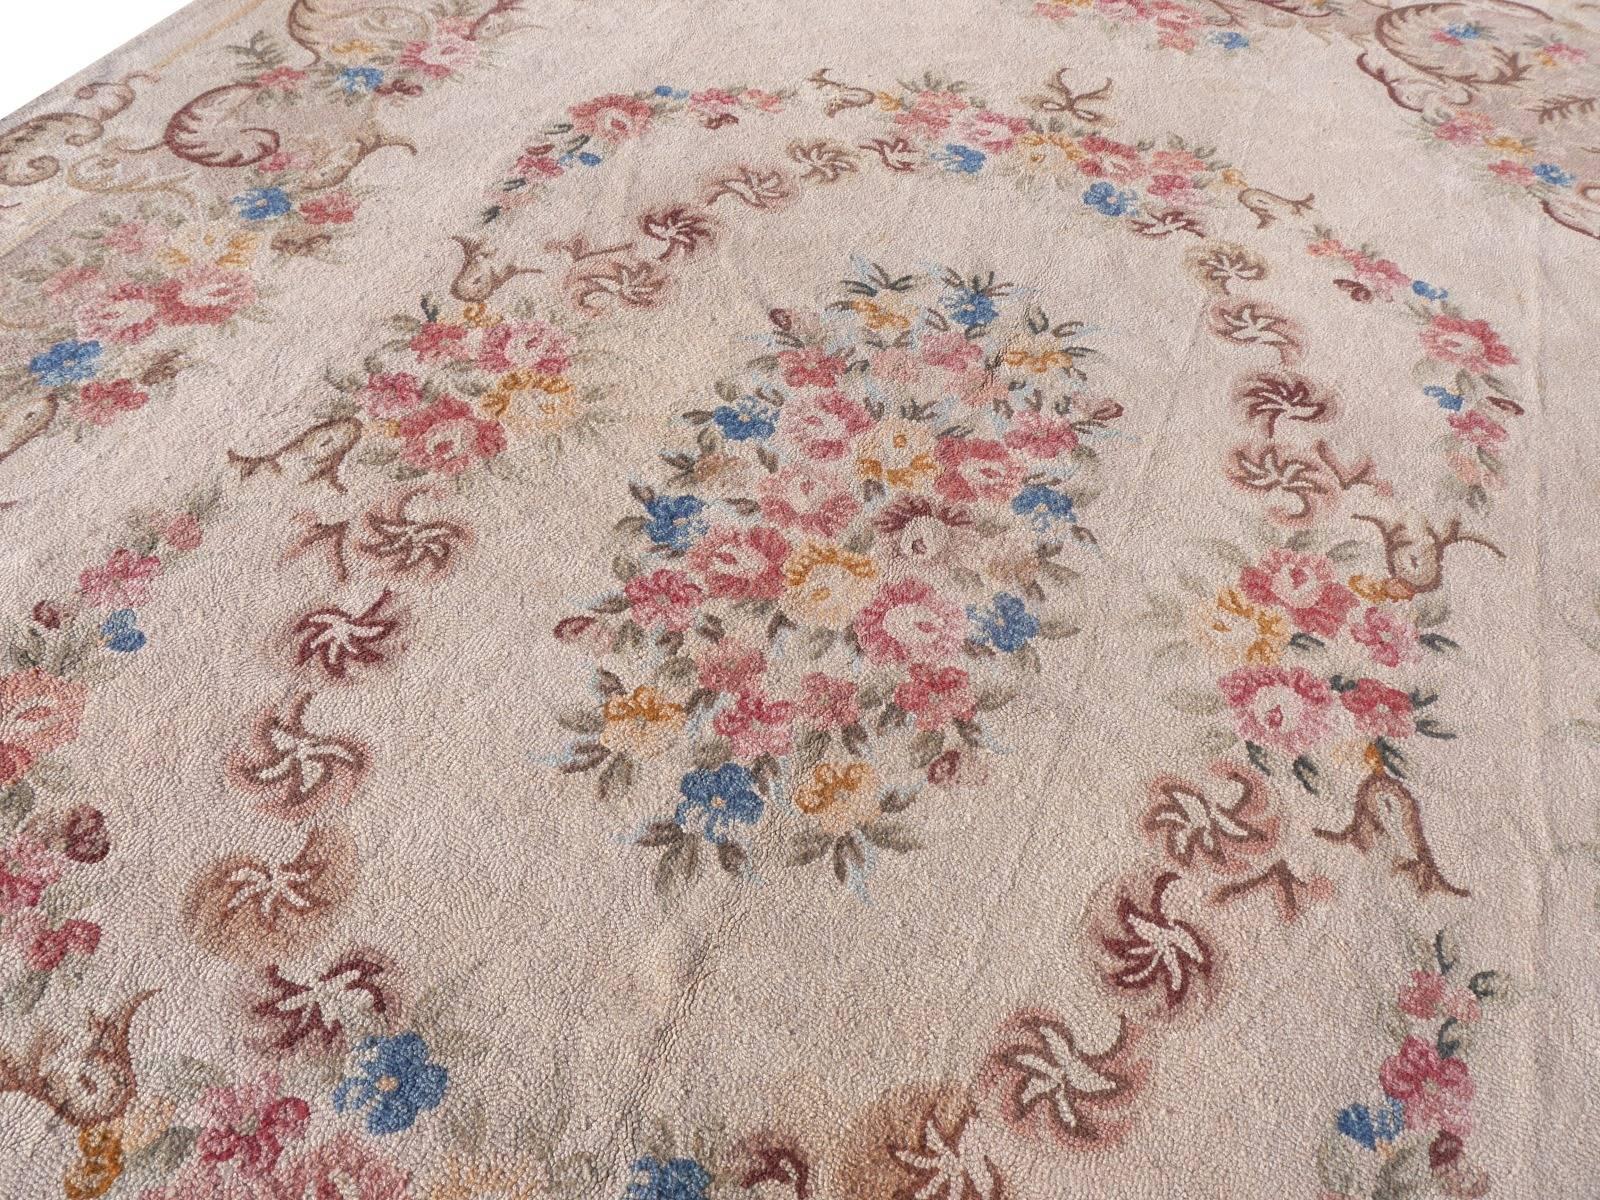 Wool 1920s Needlepoint European Rug Arts and Crafts Period/Savonnerie Design For Sale